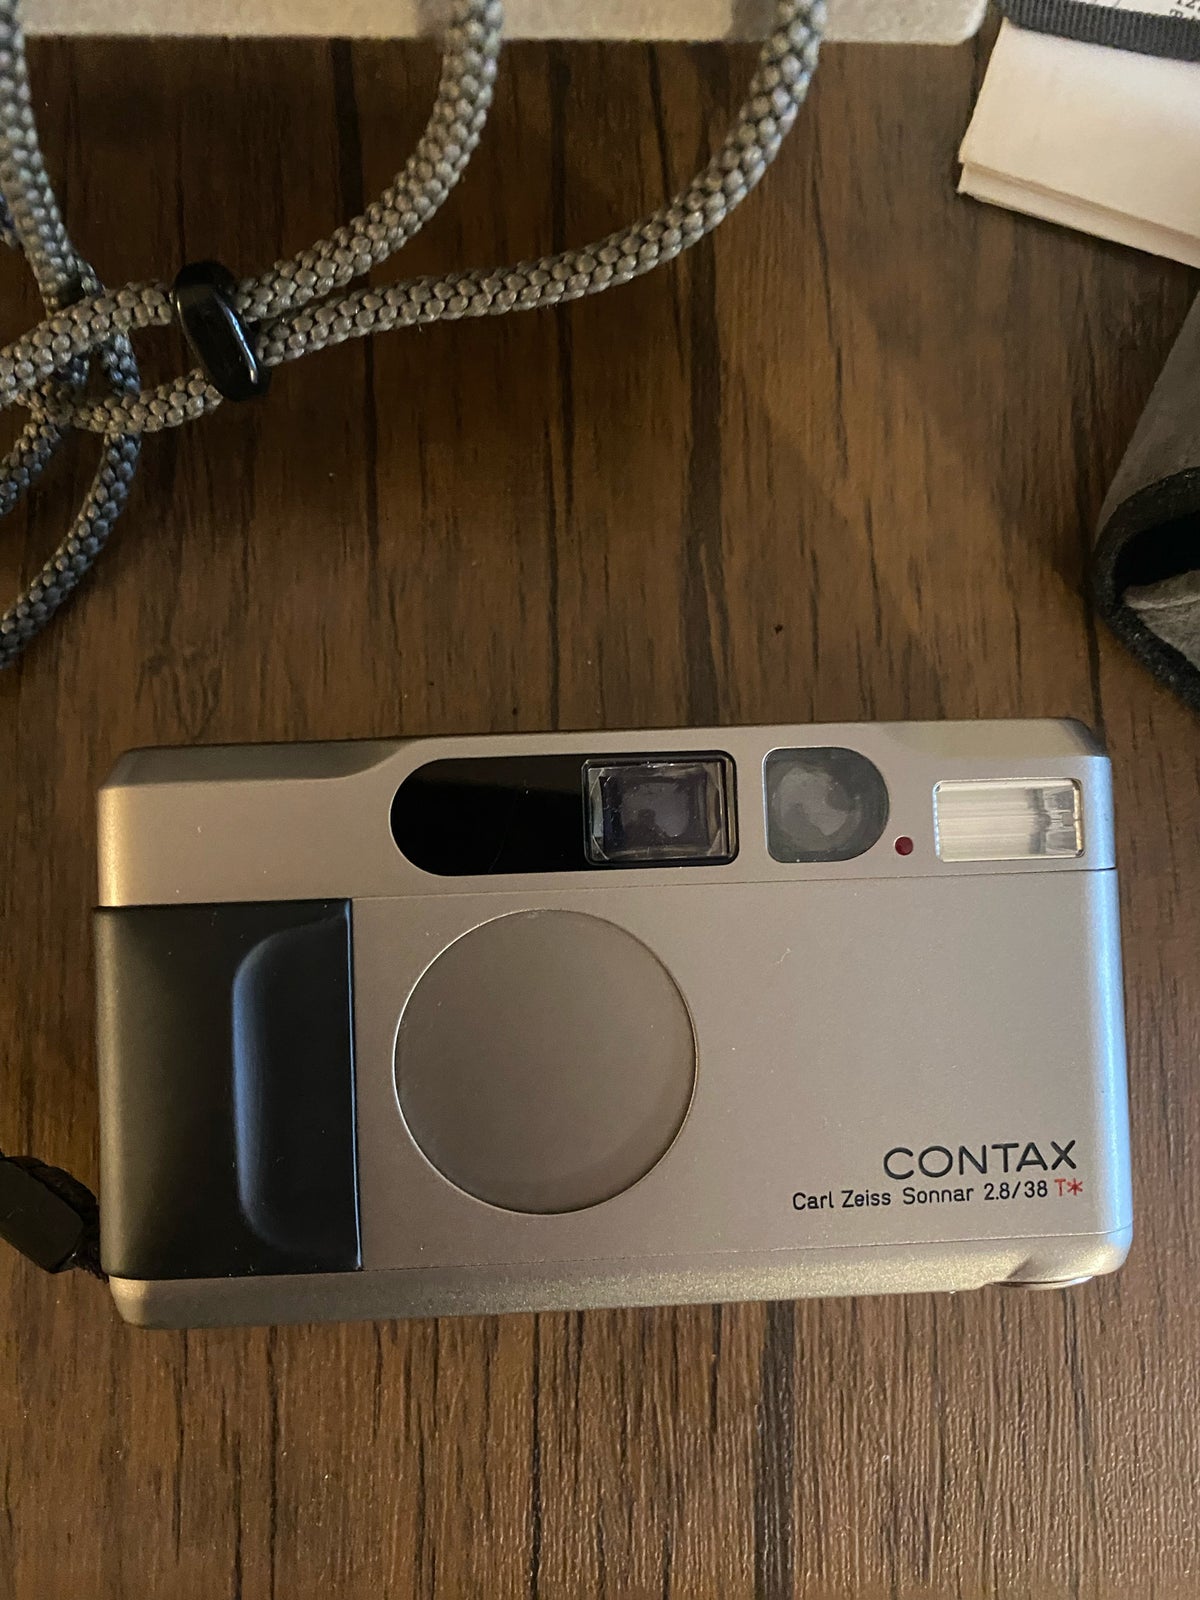 Contax, Contax t2 point and shoot , Perfekt